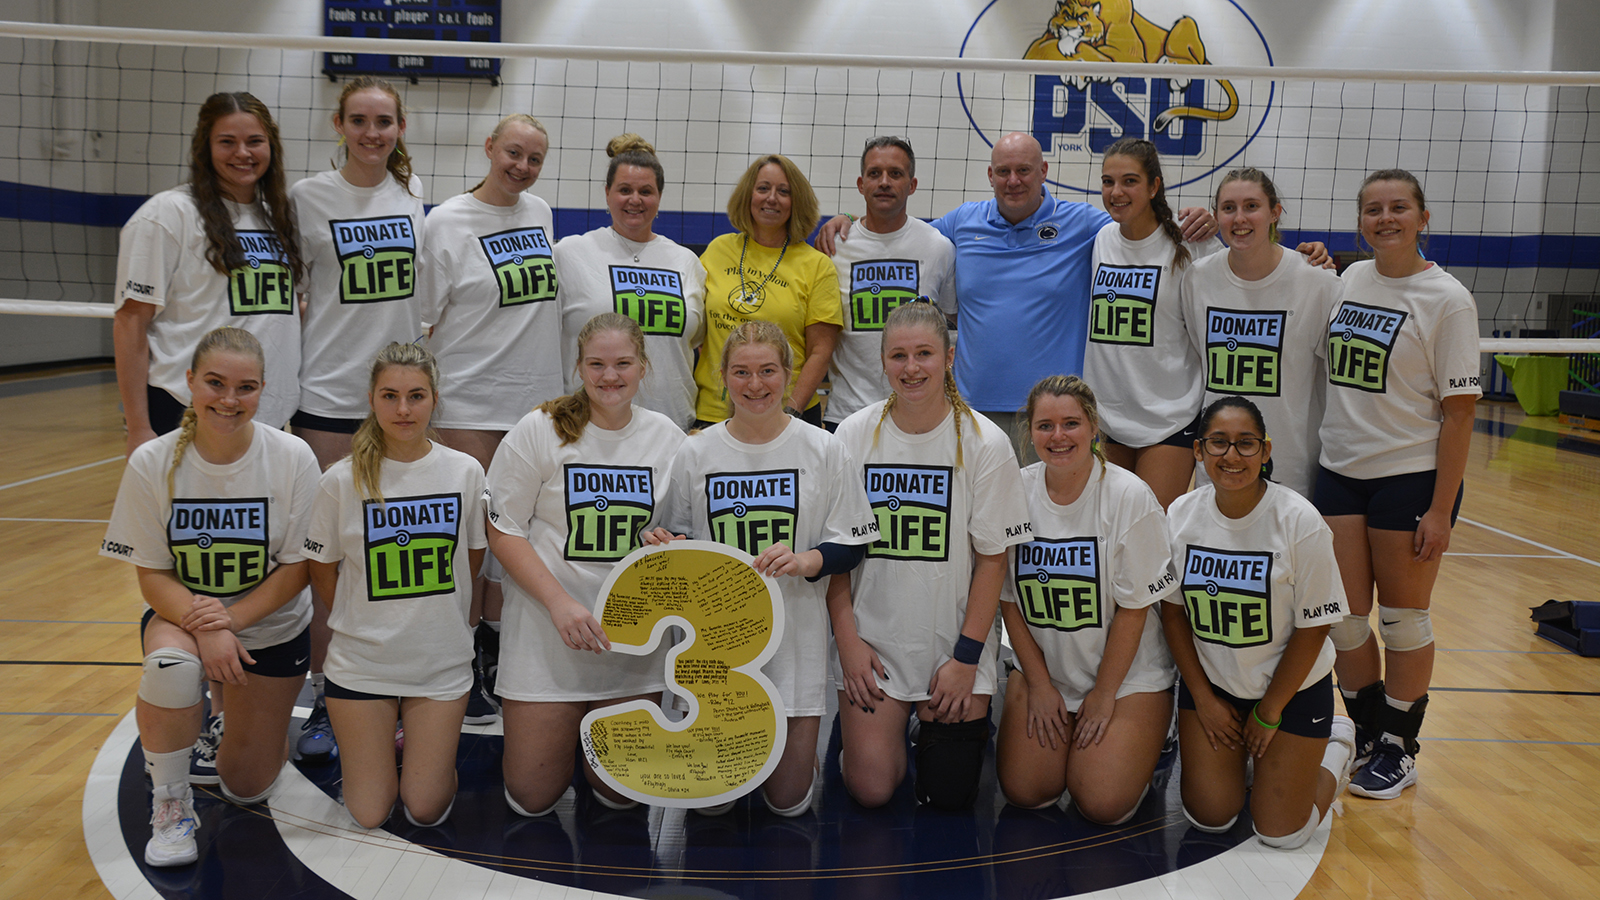 Gift of Life Game Held in Honor of Courtney Groft